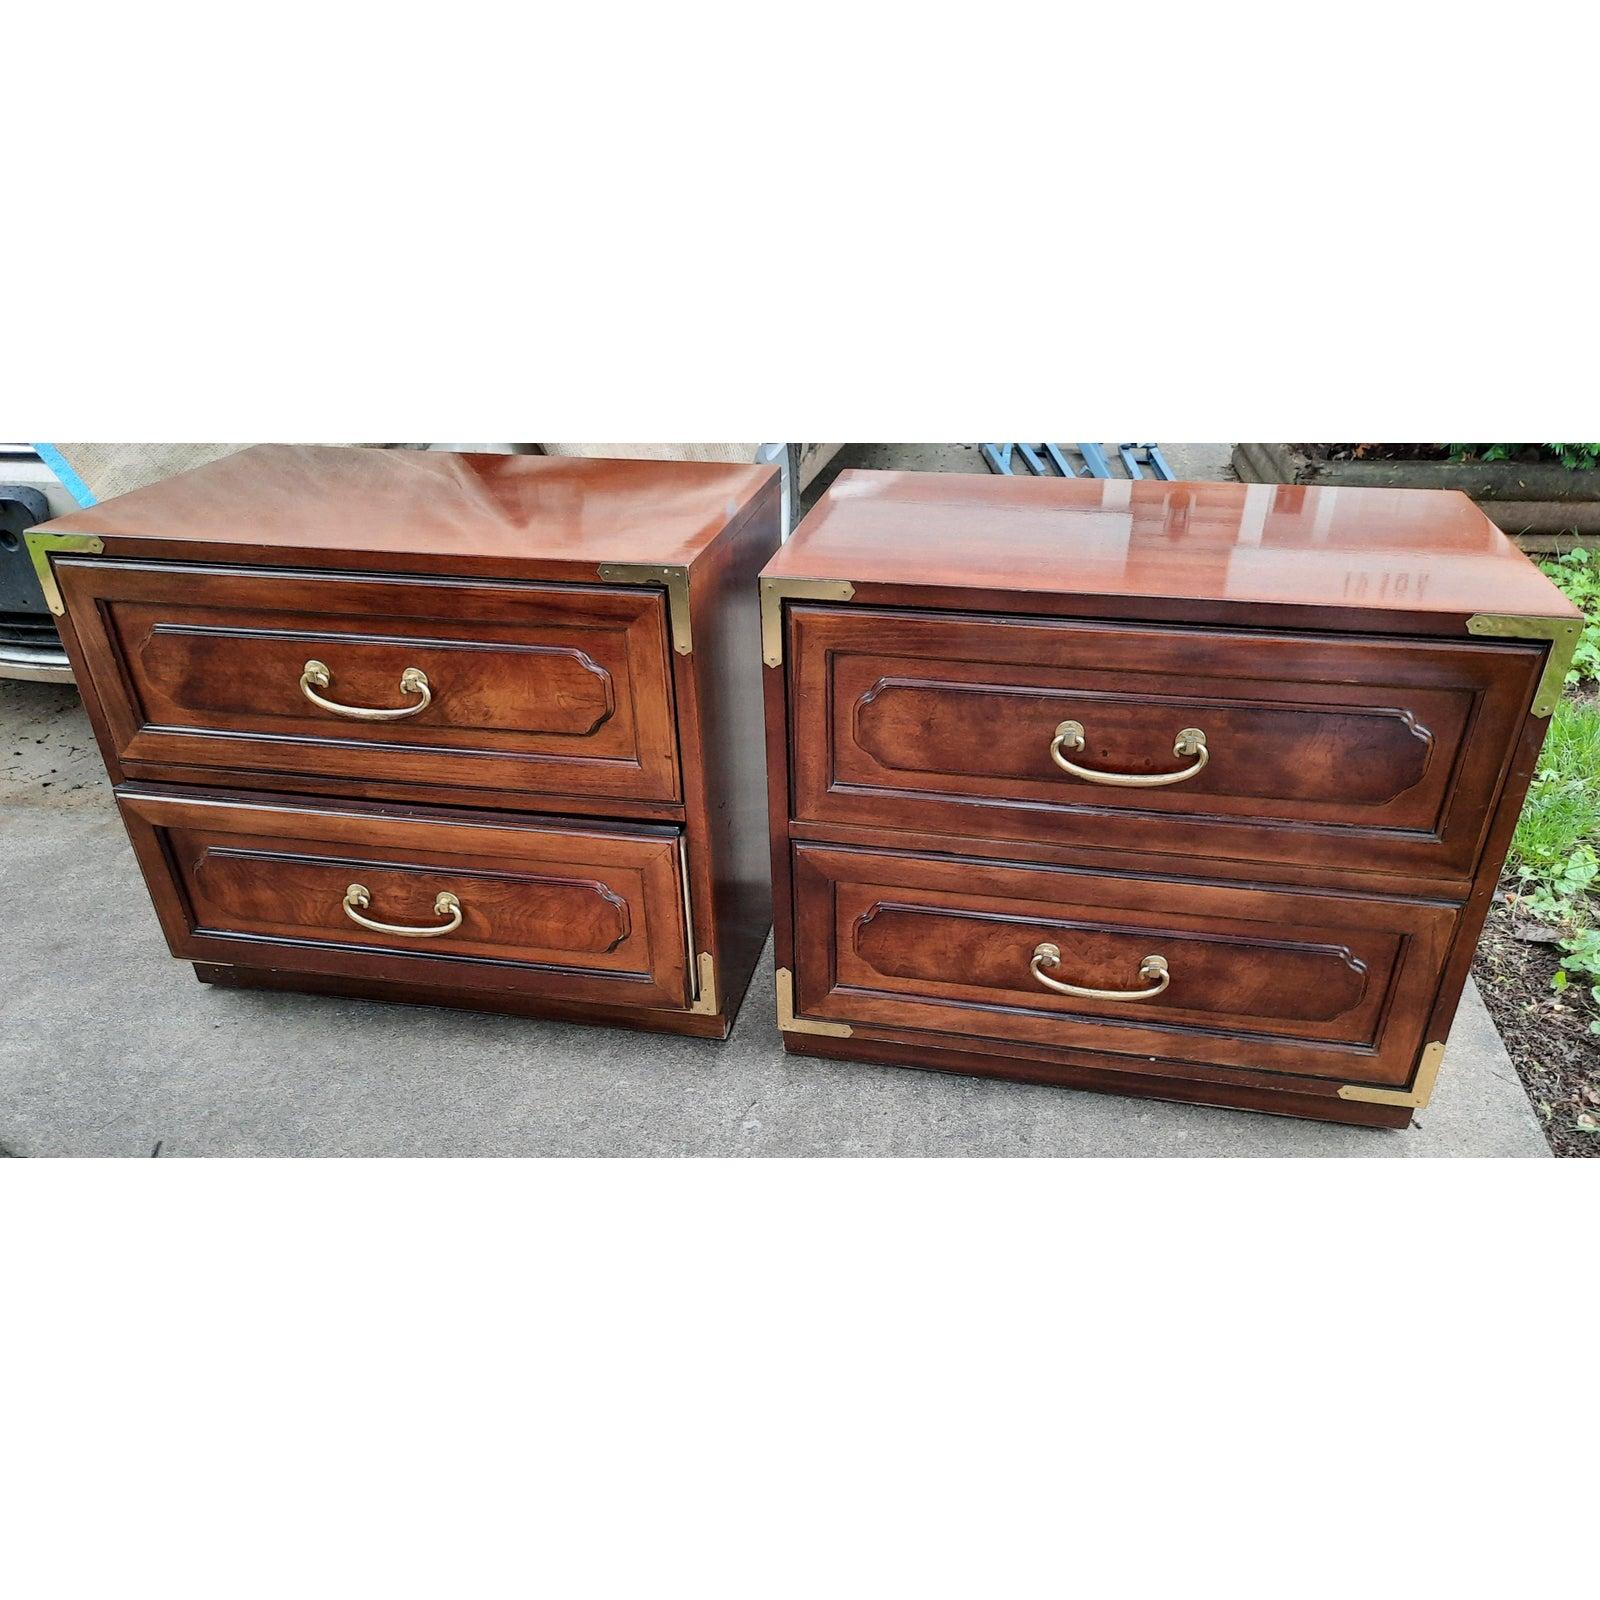 Bernhardt Asian American Campaign Mahogany Burl Nightstands, a Pair For Sale 2